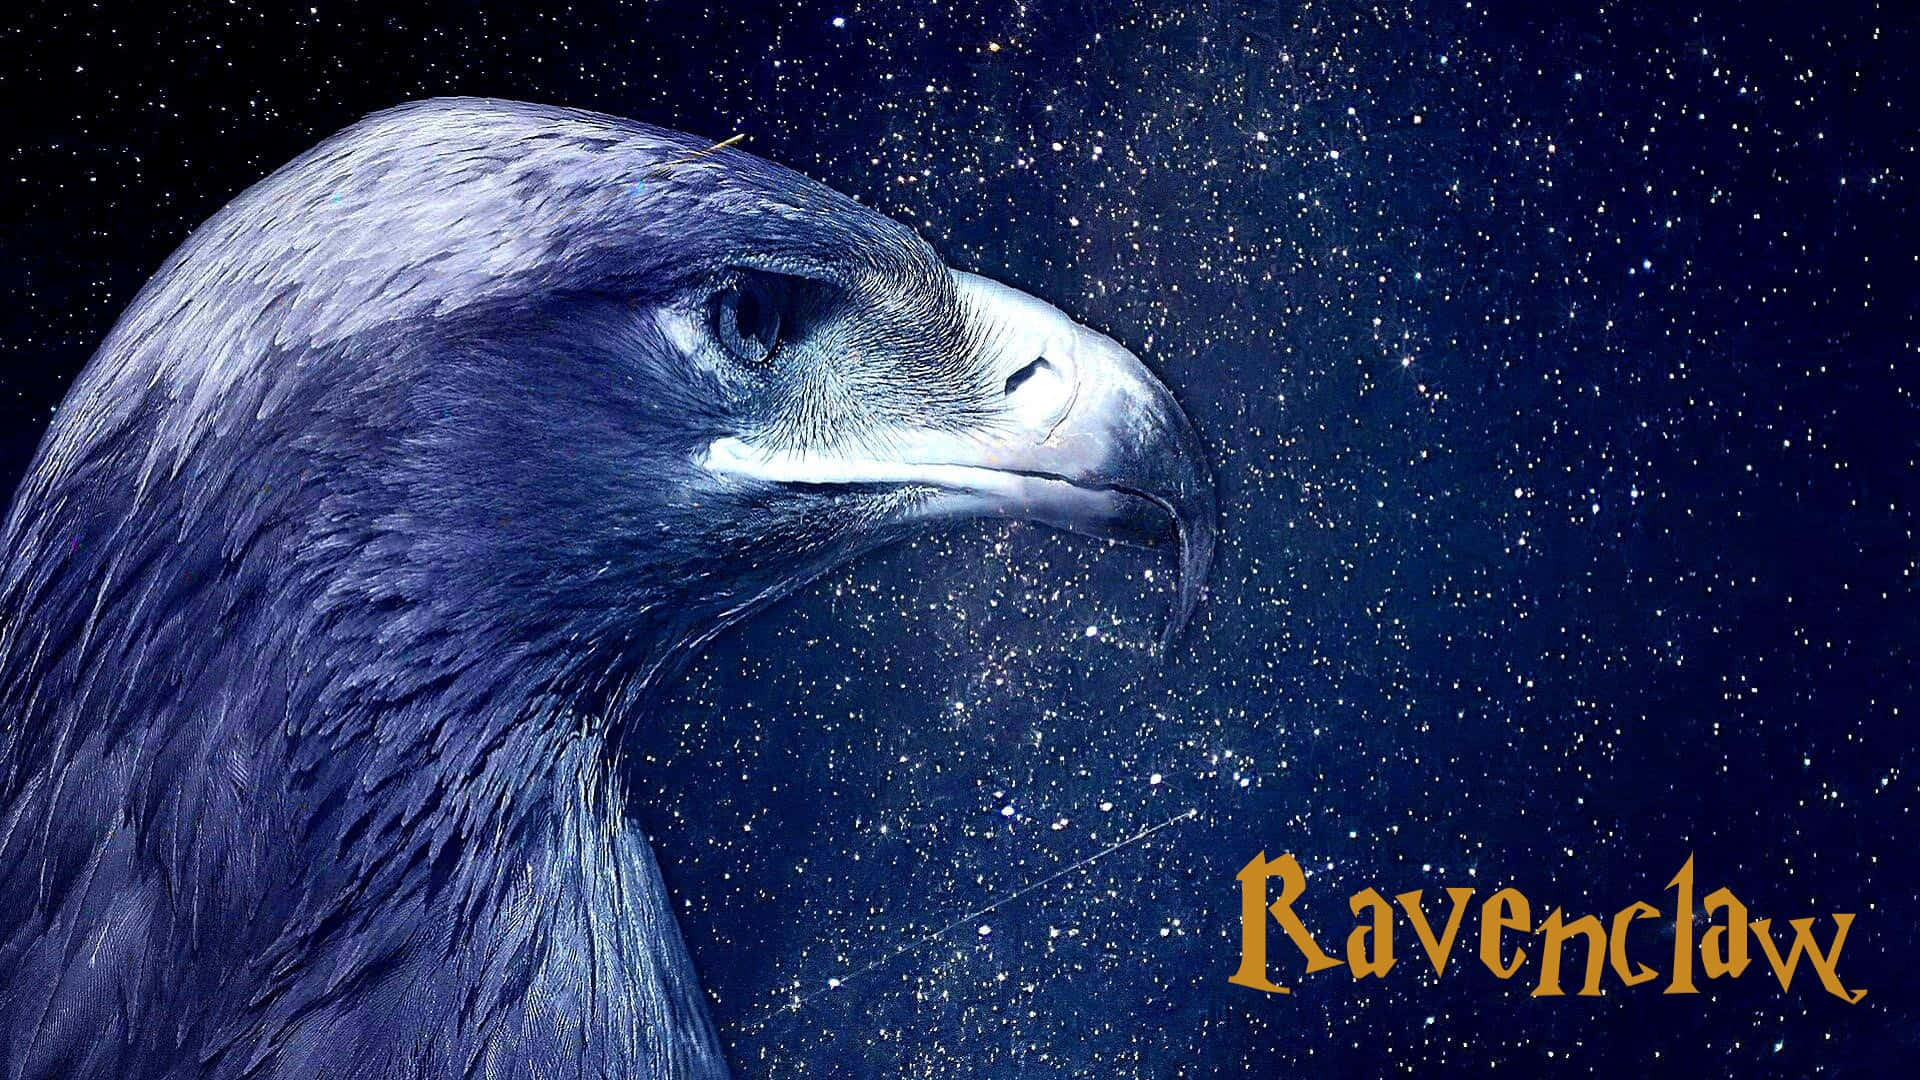 Put on your Ravenclaw robes and be brave!